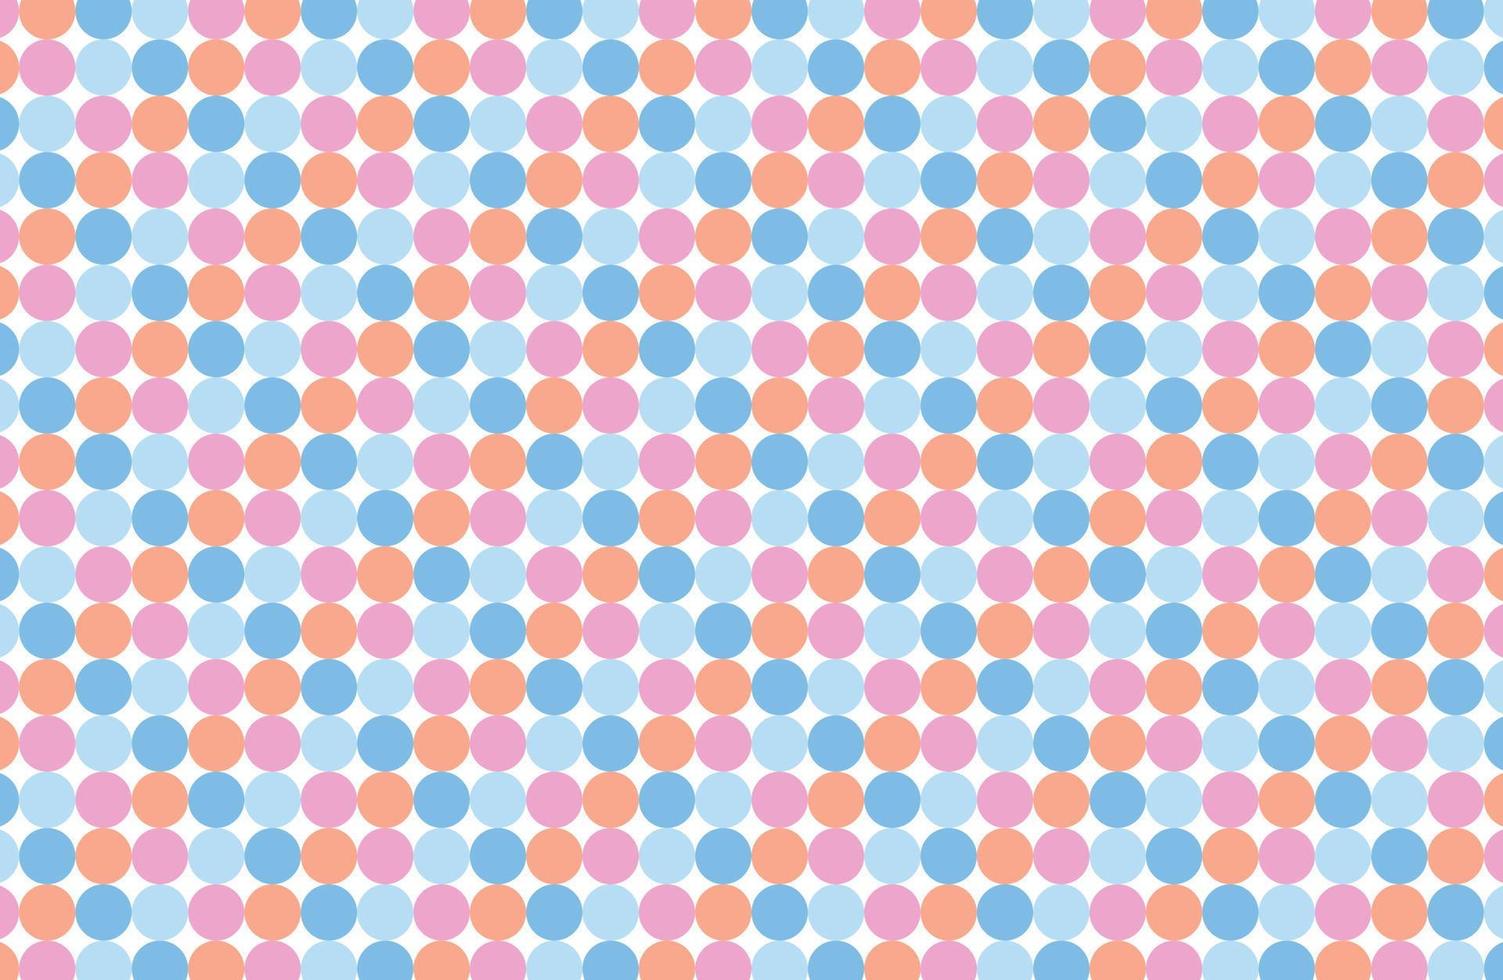 Abstract polkadot pastel color background vector